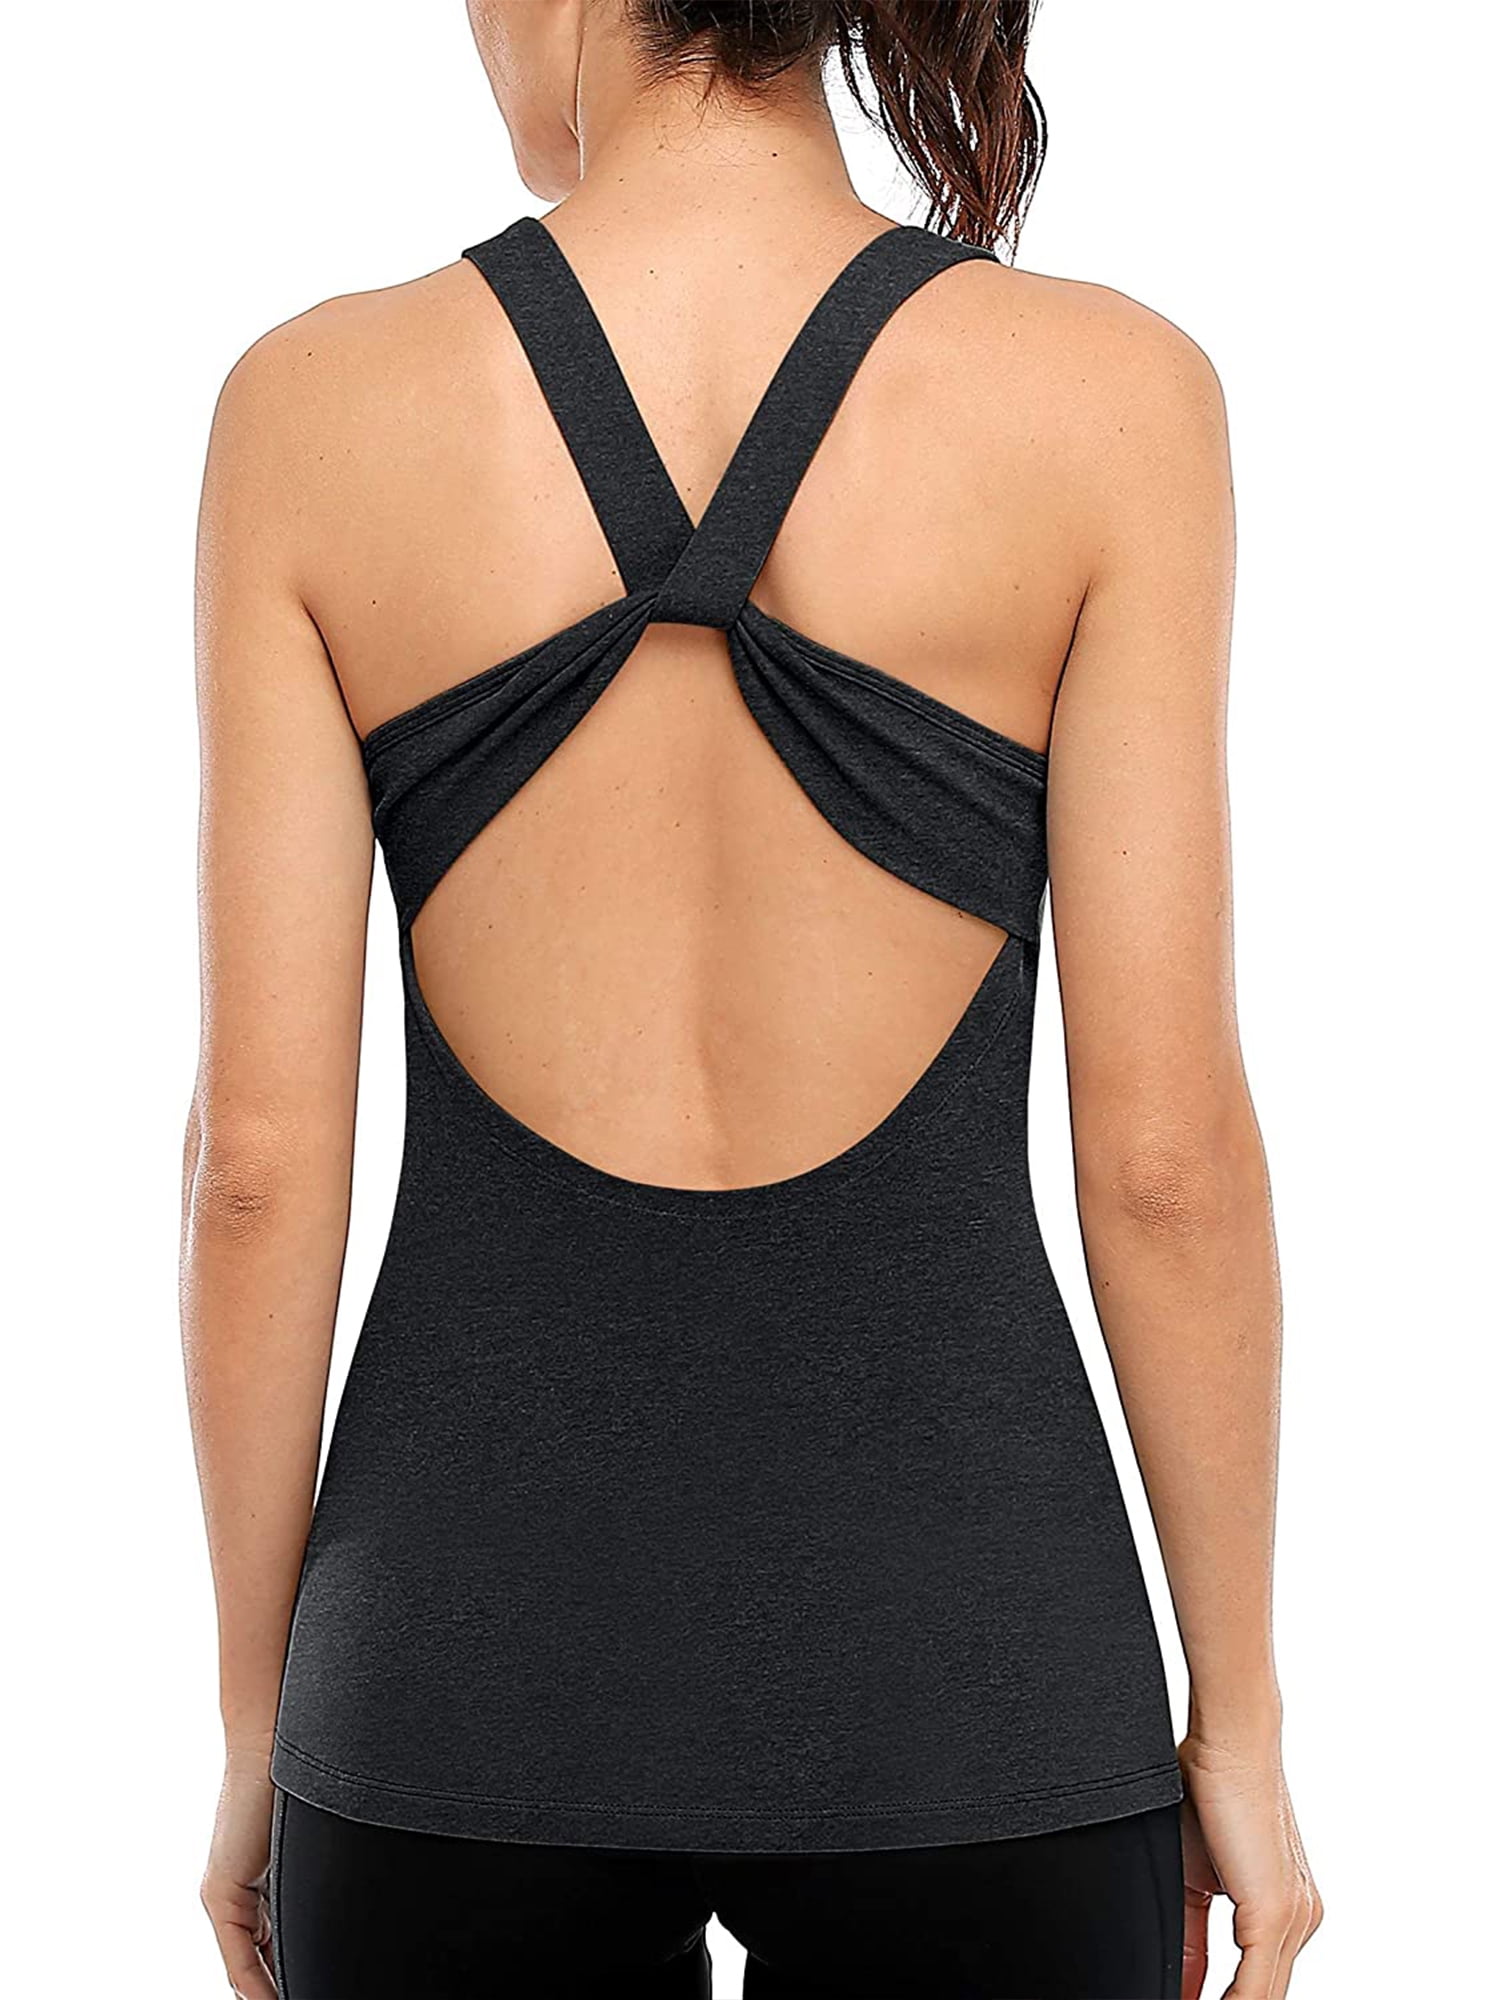  Workout Shirts Gym Tops Open Back Backless Workout